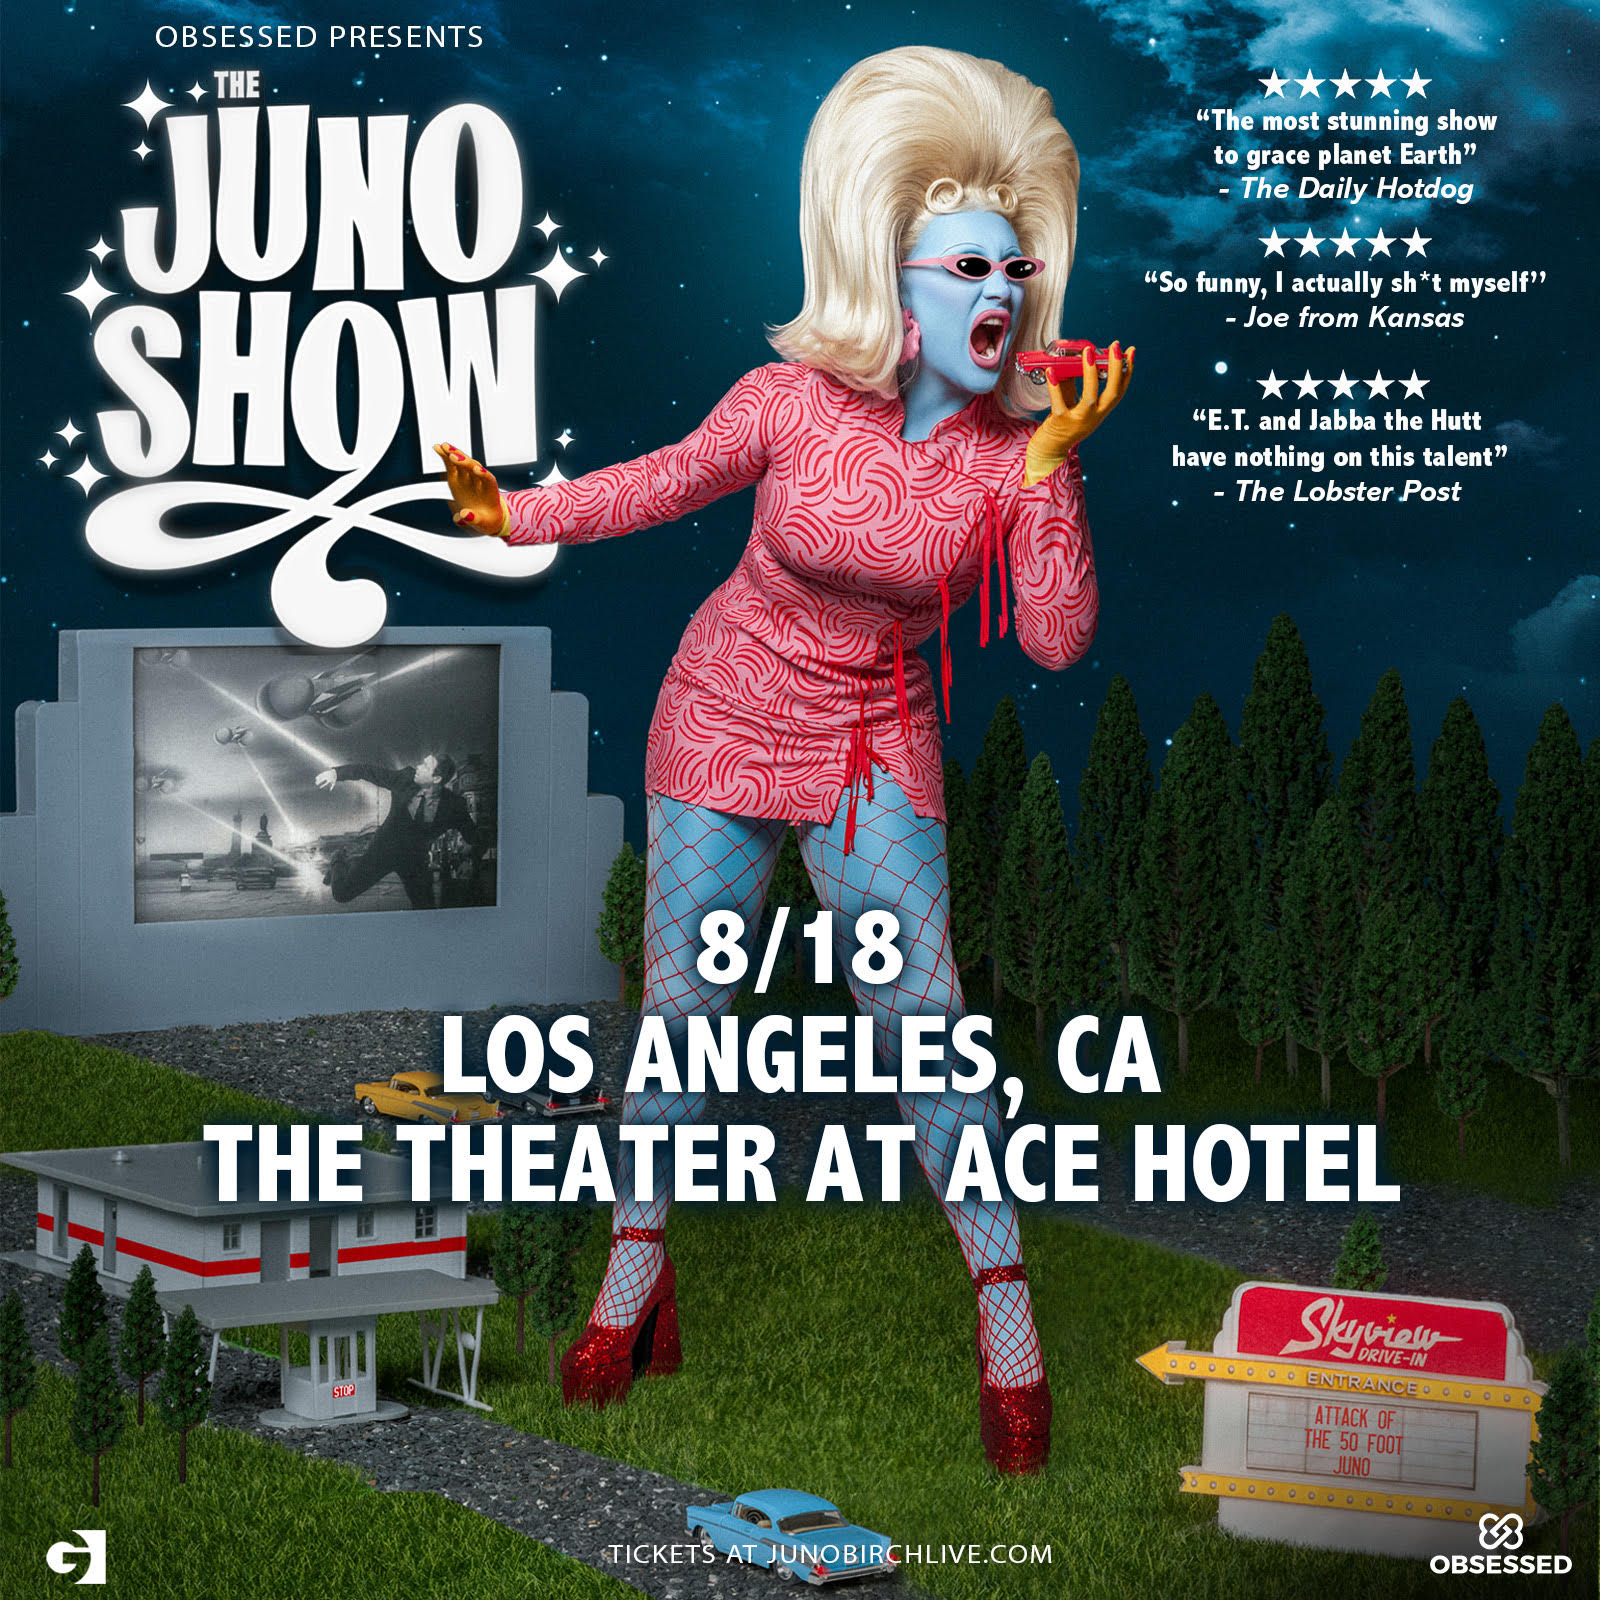 Pictured within a retro drive-in movie venue is a 50-foot tall, blue alien drag queen. She's wearing red shoes, red fishnets, a pink dress with red details, has orange hands, a high blonde updo with bang pin curls, and pink, thin sunglasses. She is posed about to eat a tiny red retro car, mimicking a Godzilla pose. In the text behind her, "Obsessed Presents: The Juno Show, 8/18 Los Angeles, CA, The Theatre at Ace Hotel" To purchase tickets, "Tickets at Junobirchlive.com"